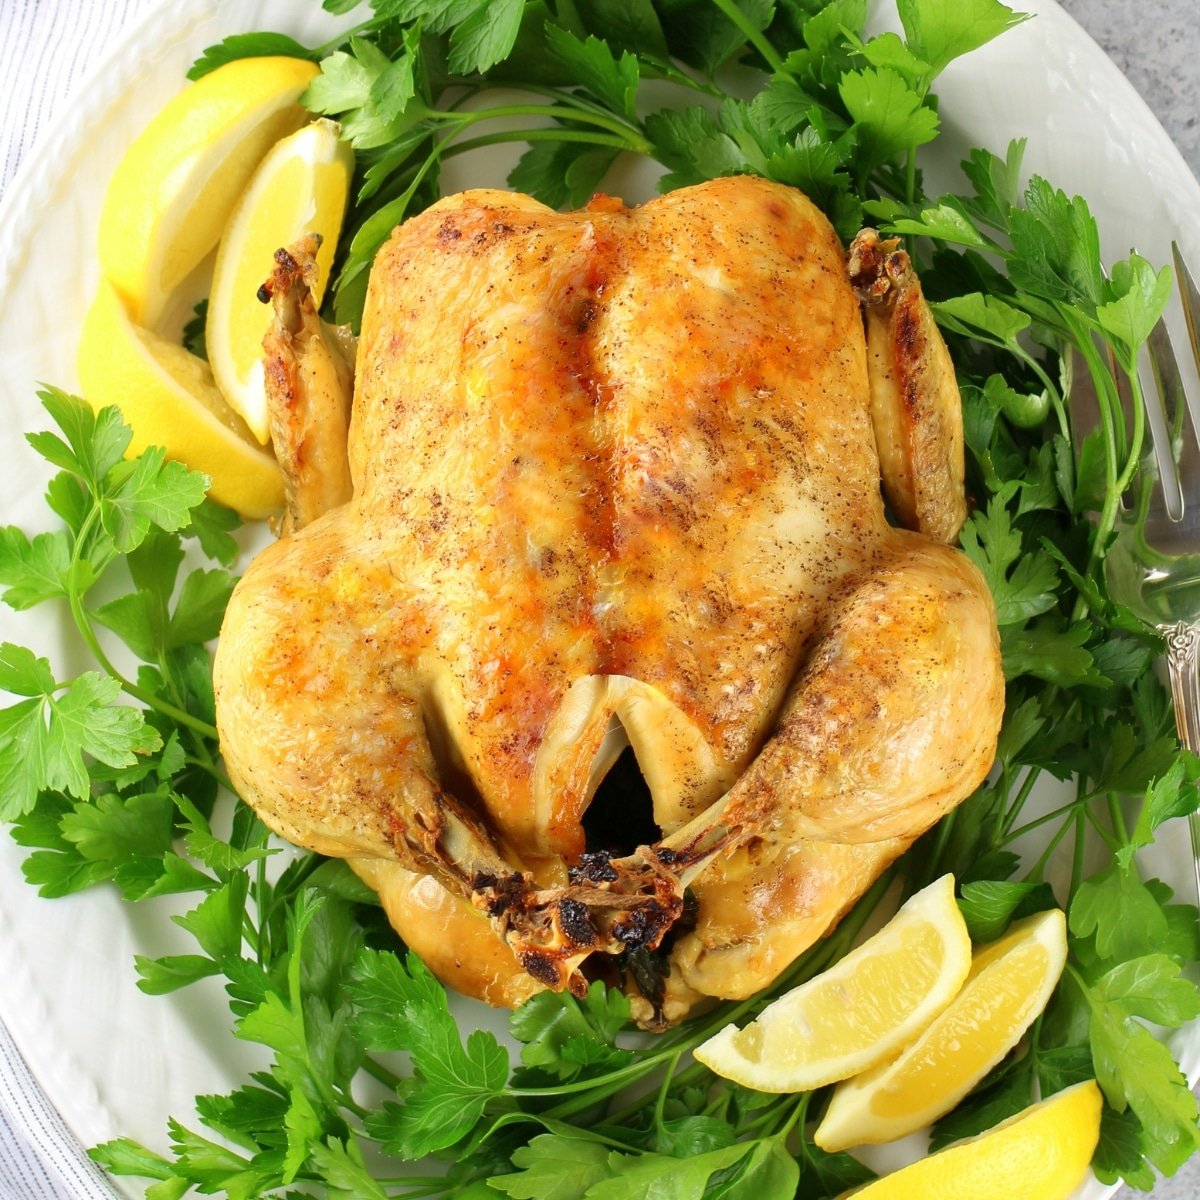 https://tasteandsee.com/wp-content/uploads/2023/11/Whole-chicken-cooked-in-the-iP-and-ready-for-the-oven.jpg